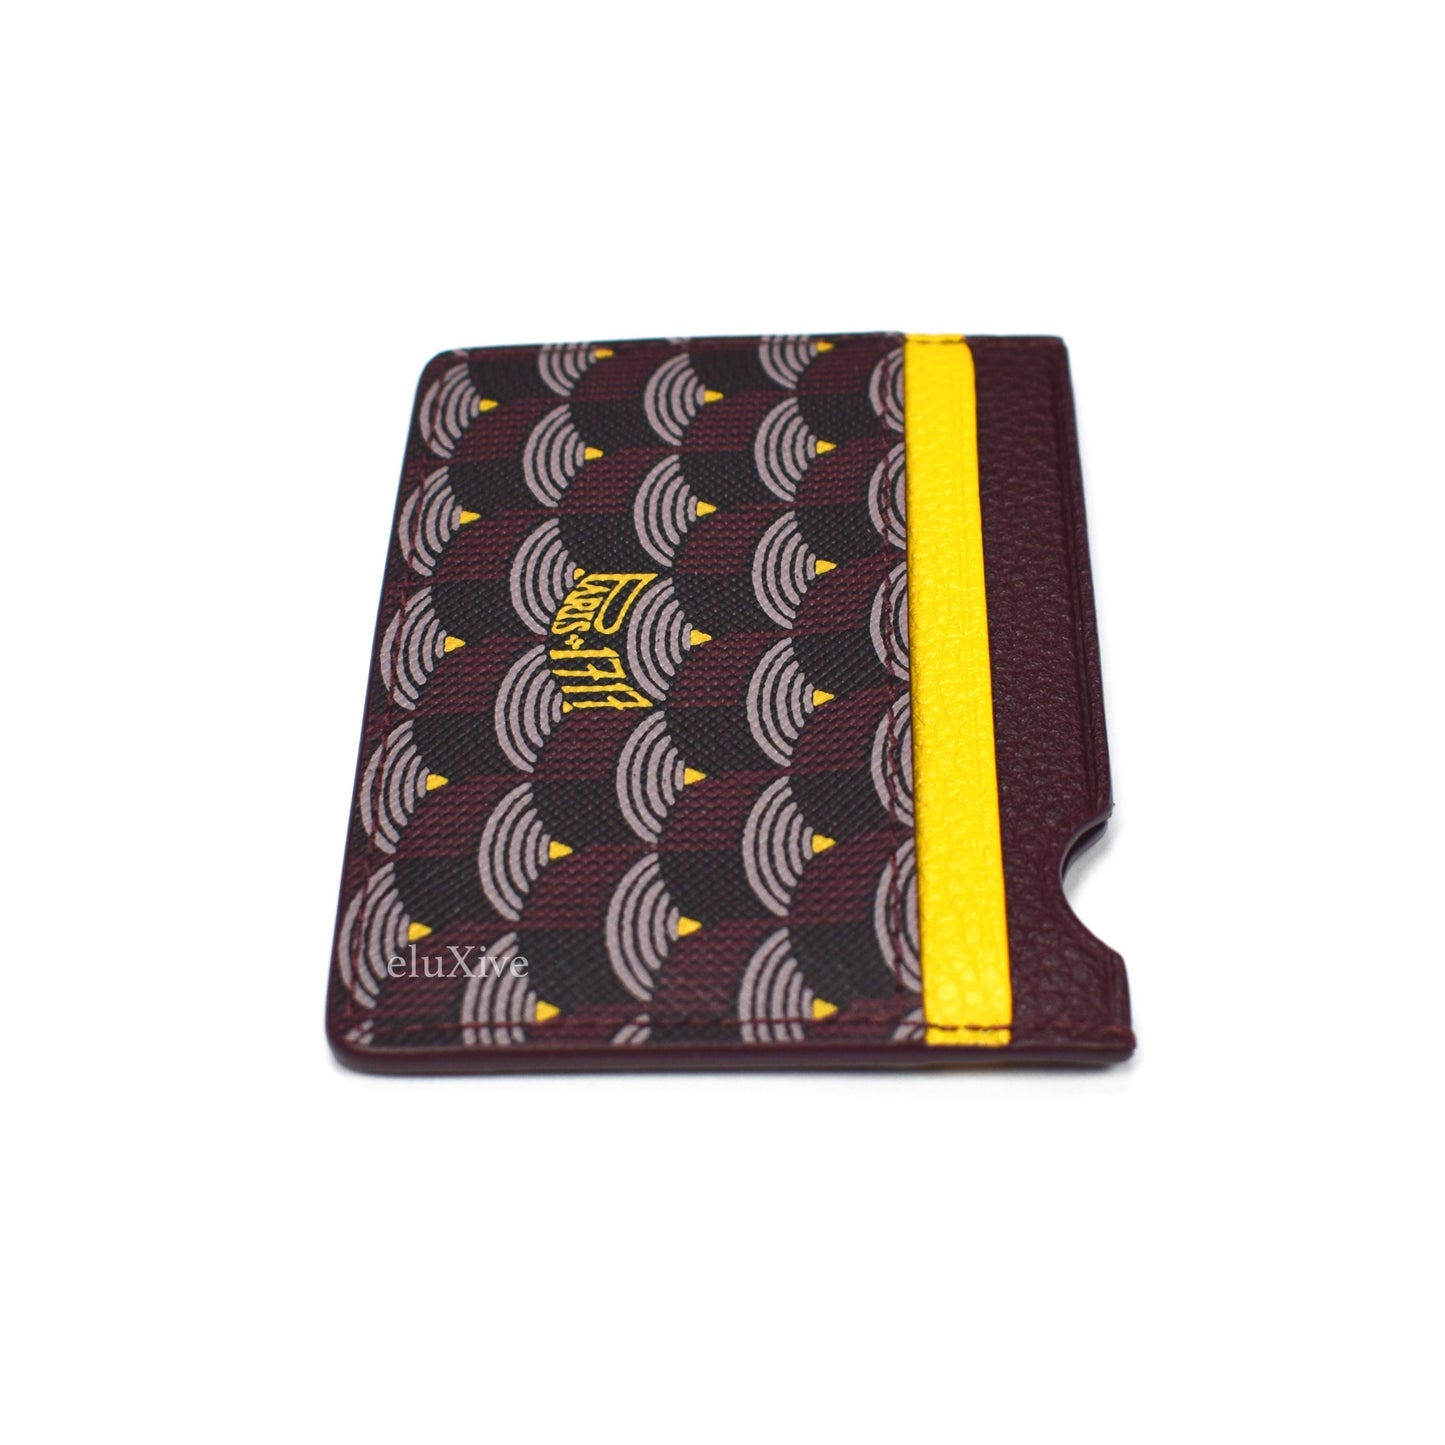 Faure Le Page - Rouge Ivresse / Yellow 4CC Card Holder